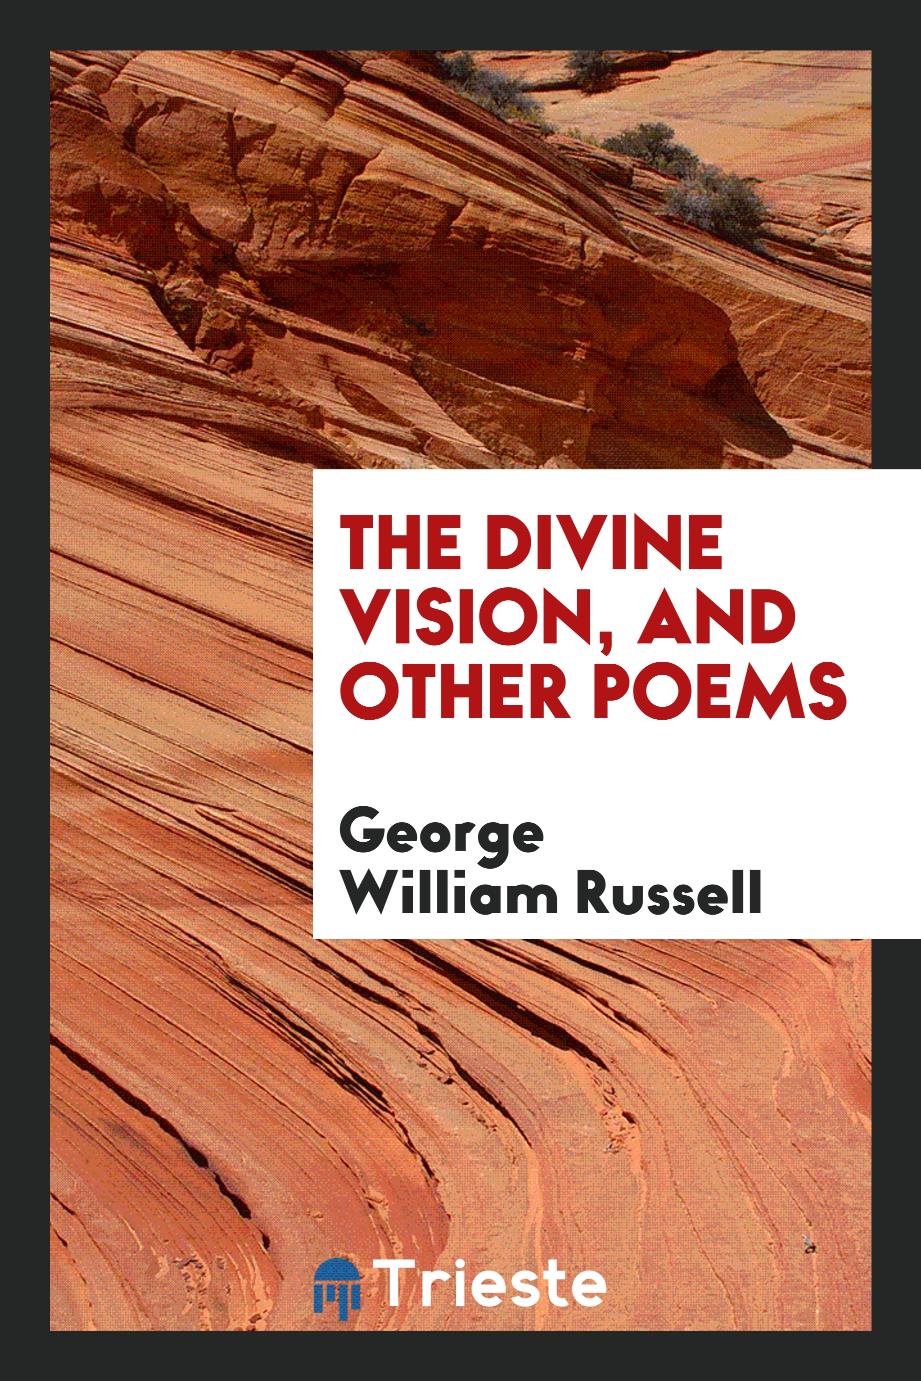 The divine vision, and other poems